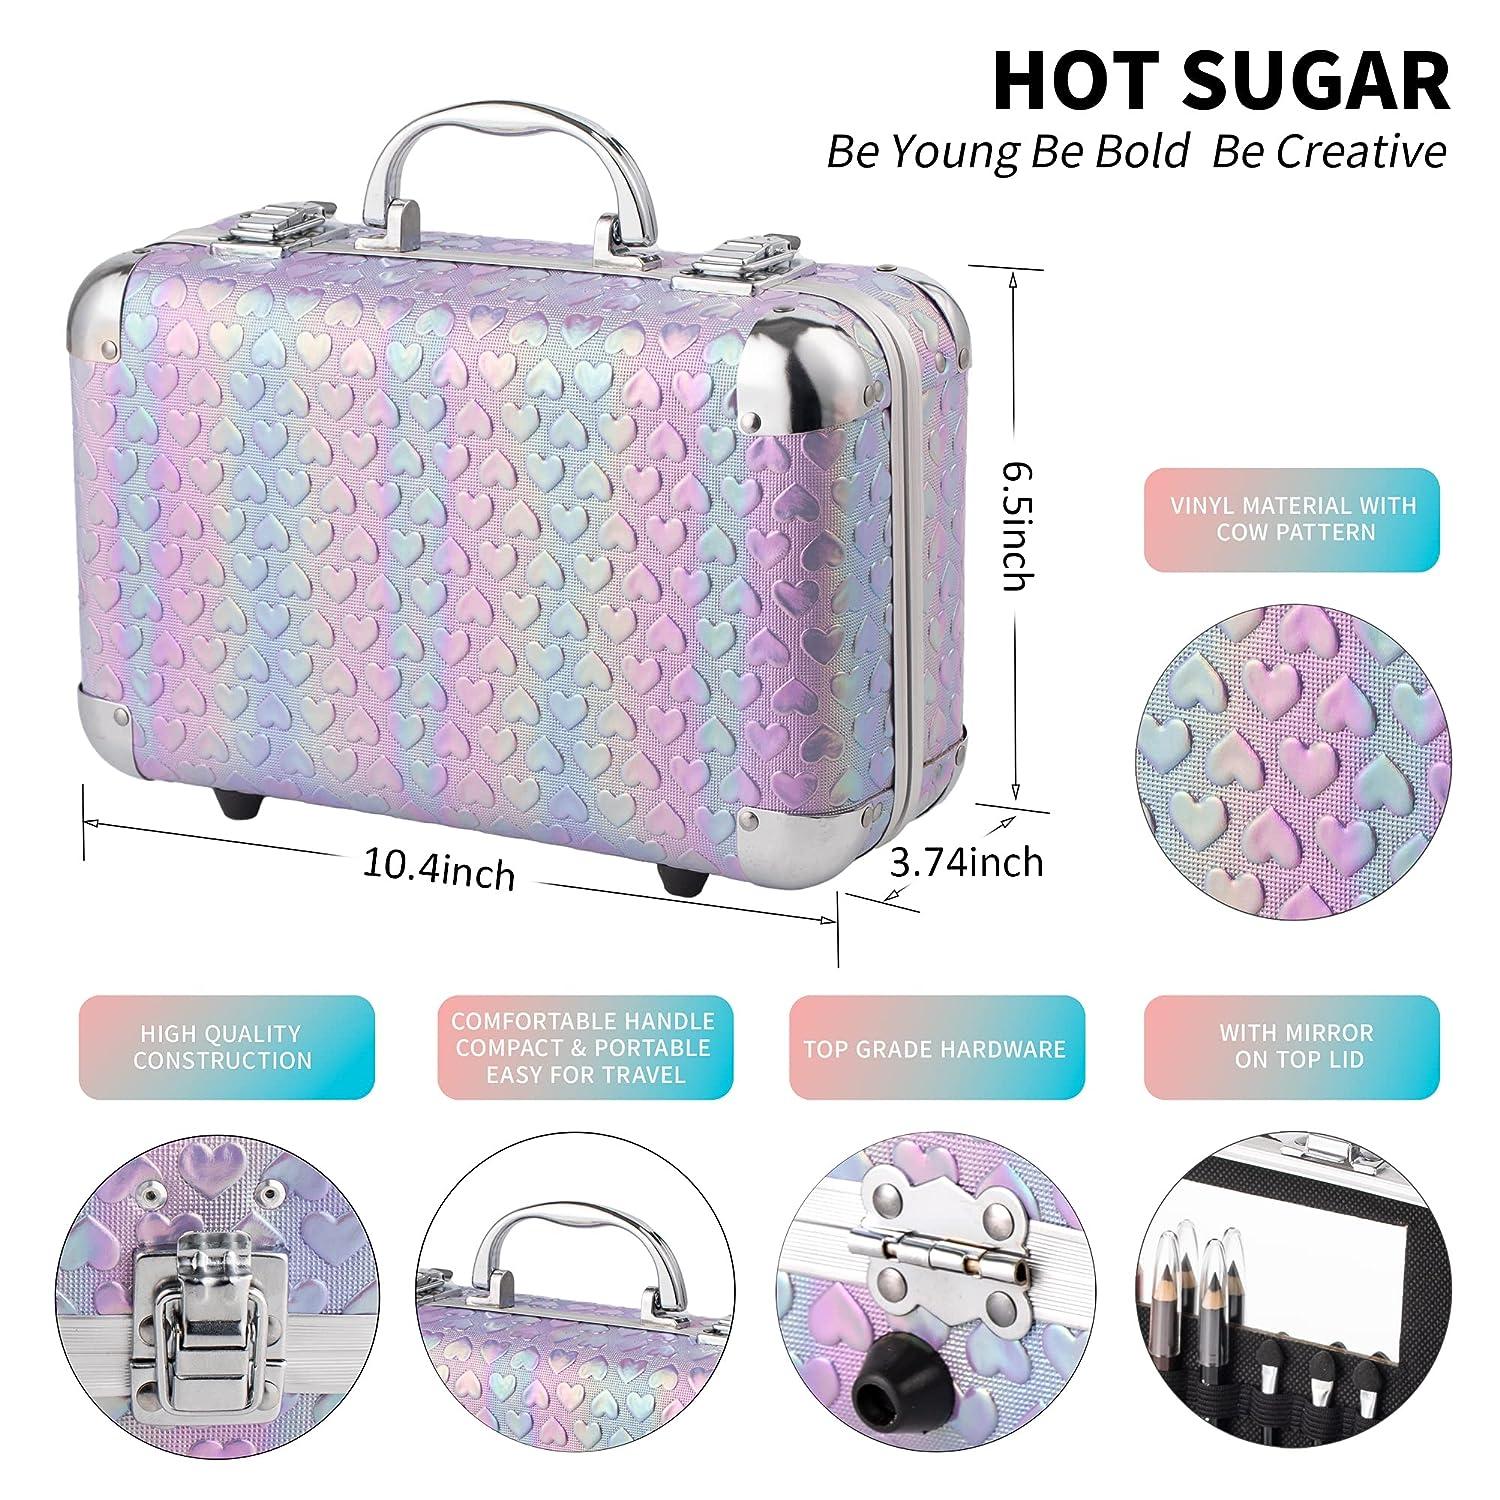 Hot Sugar All In One Makeup Set for Teenager Girls 10-12 Full Makeup Kit  for Beginners Includes Eye Shadow Palette Blush Lip Gloss Lipstick Lip  Pencil Eye Pencil Brush Mirror (Purple Heart)